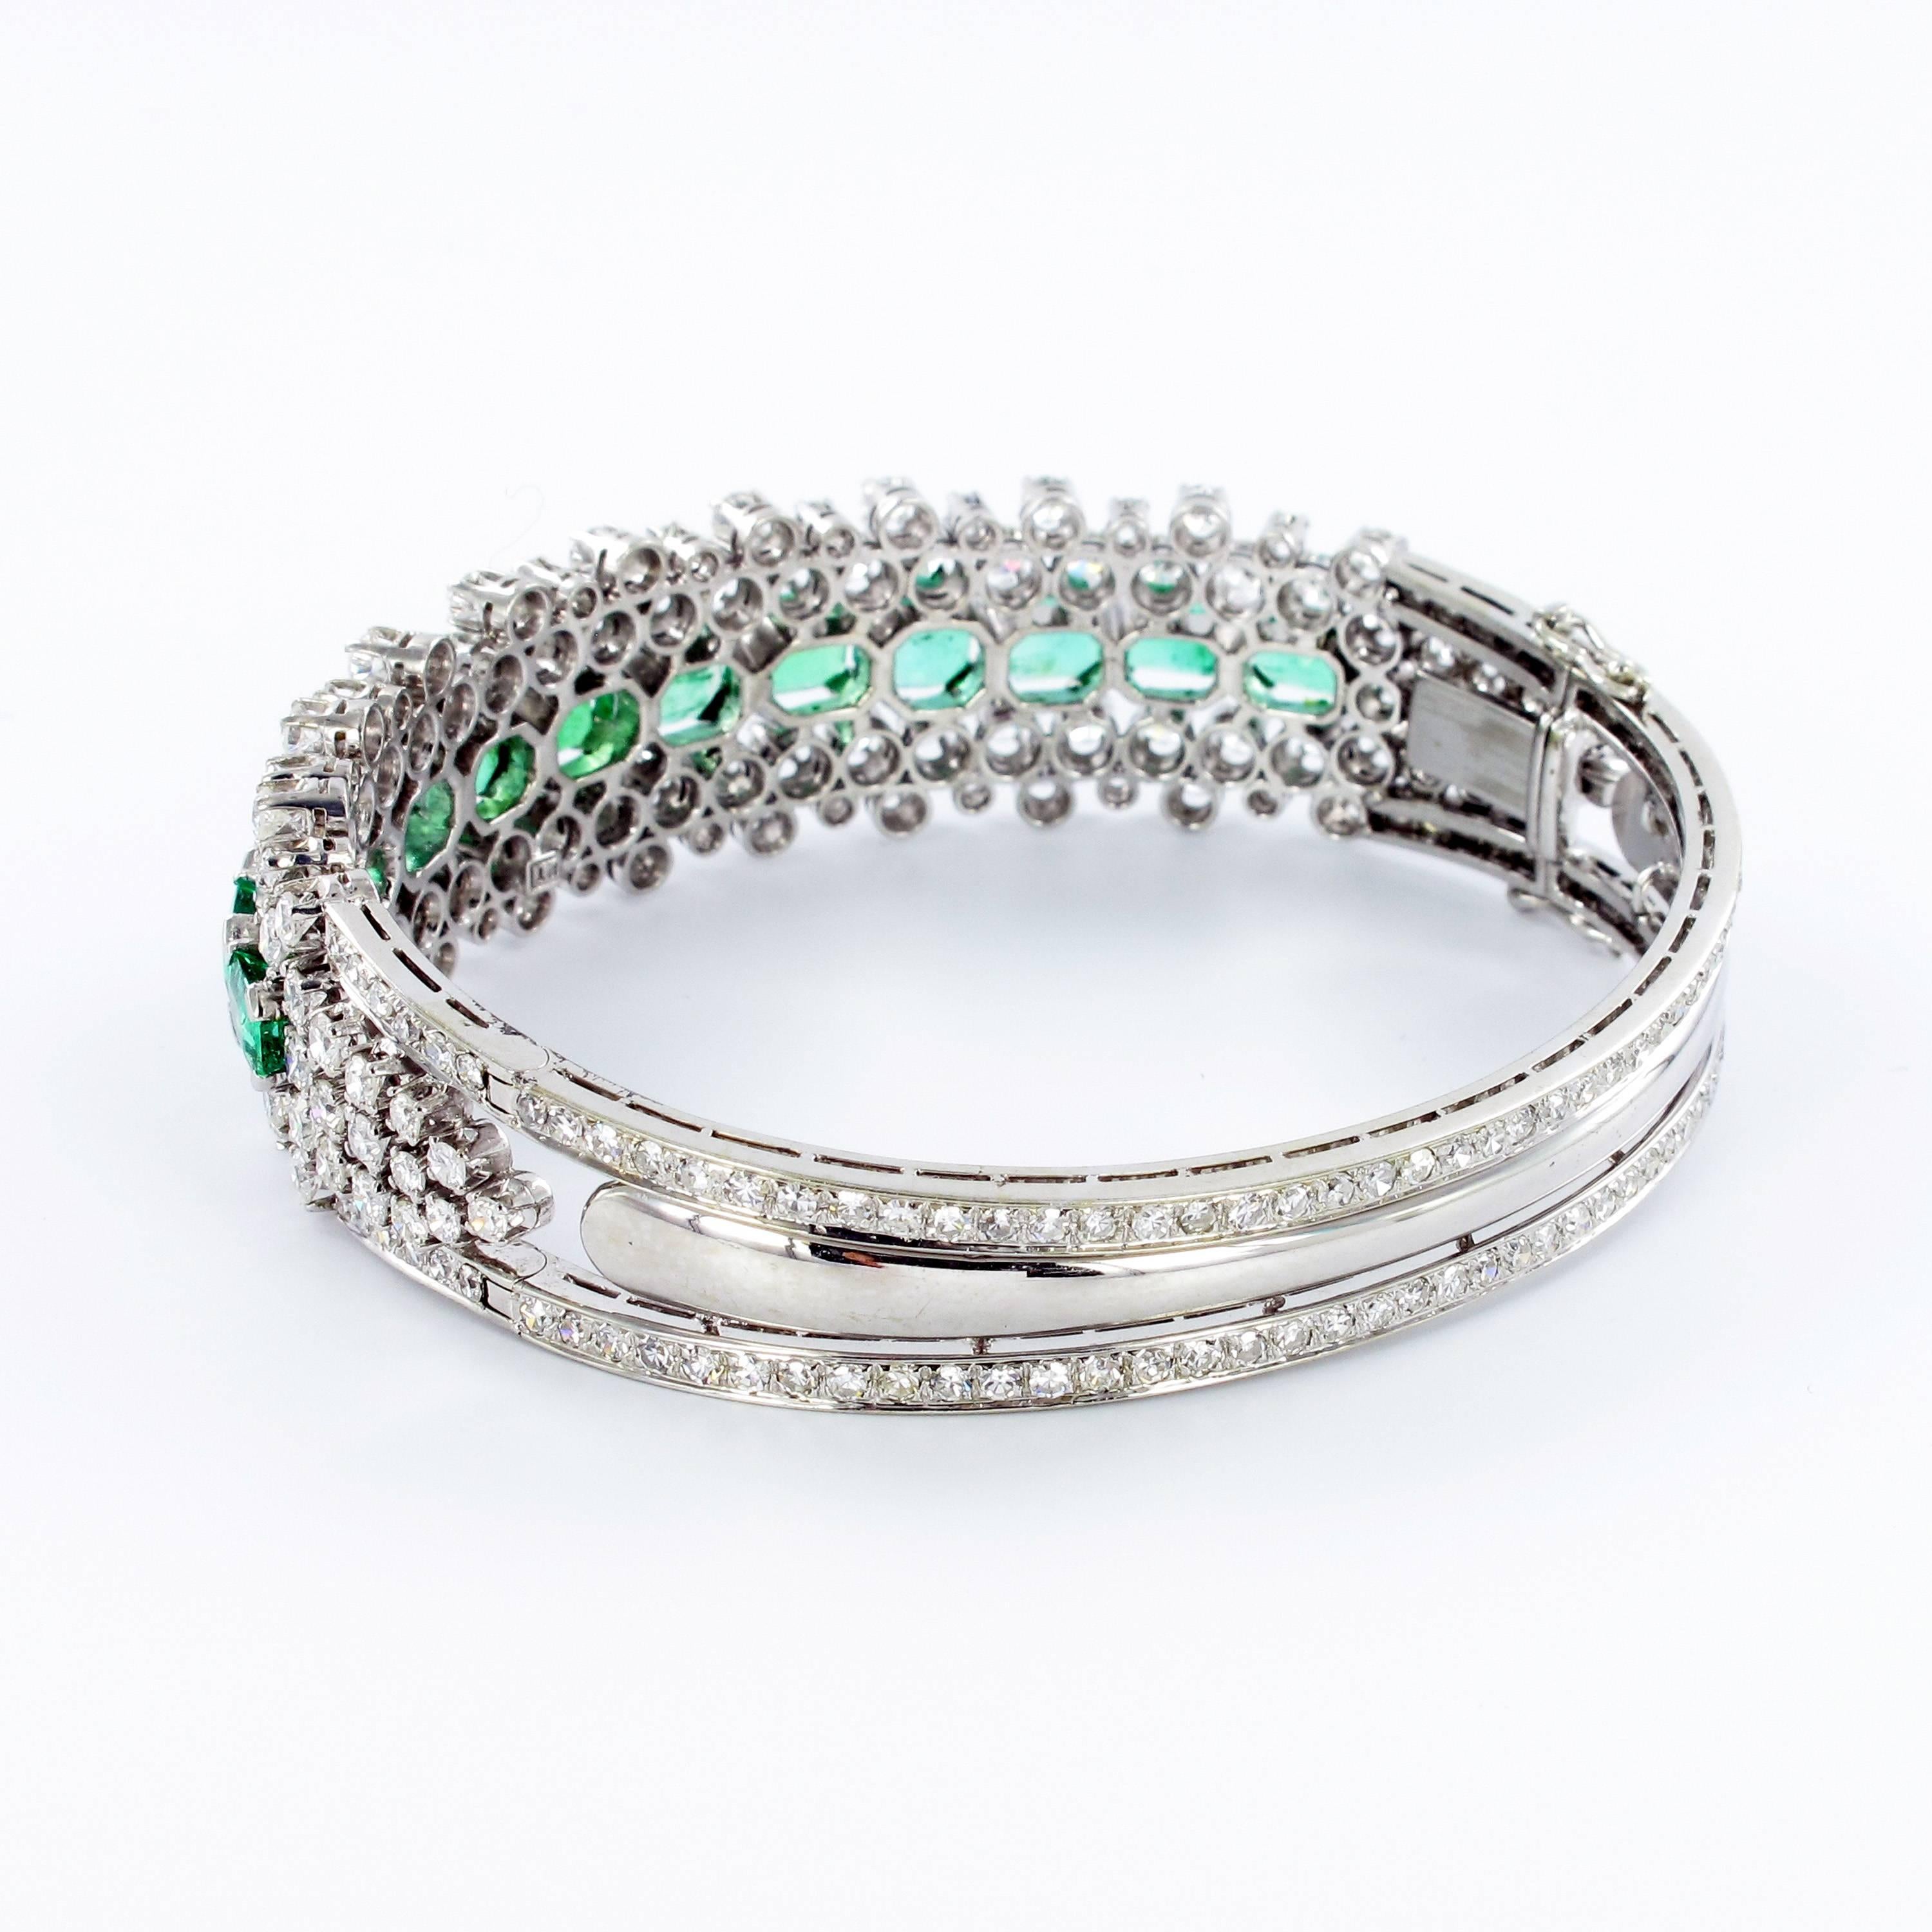 One 18k white gold bangle featuring 12 octagonal cut emeralds, total weighing approximately 7.70 carats. Further prong set with 223 brilliant and single cut round diamonds, total weighing approximately 6.50 carats, G/H-vs/si quality. Figure eight